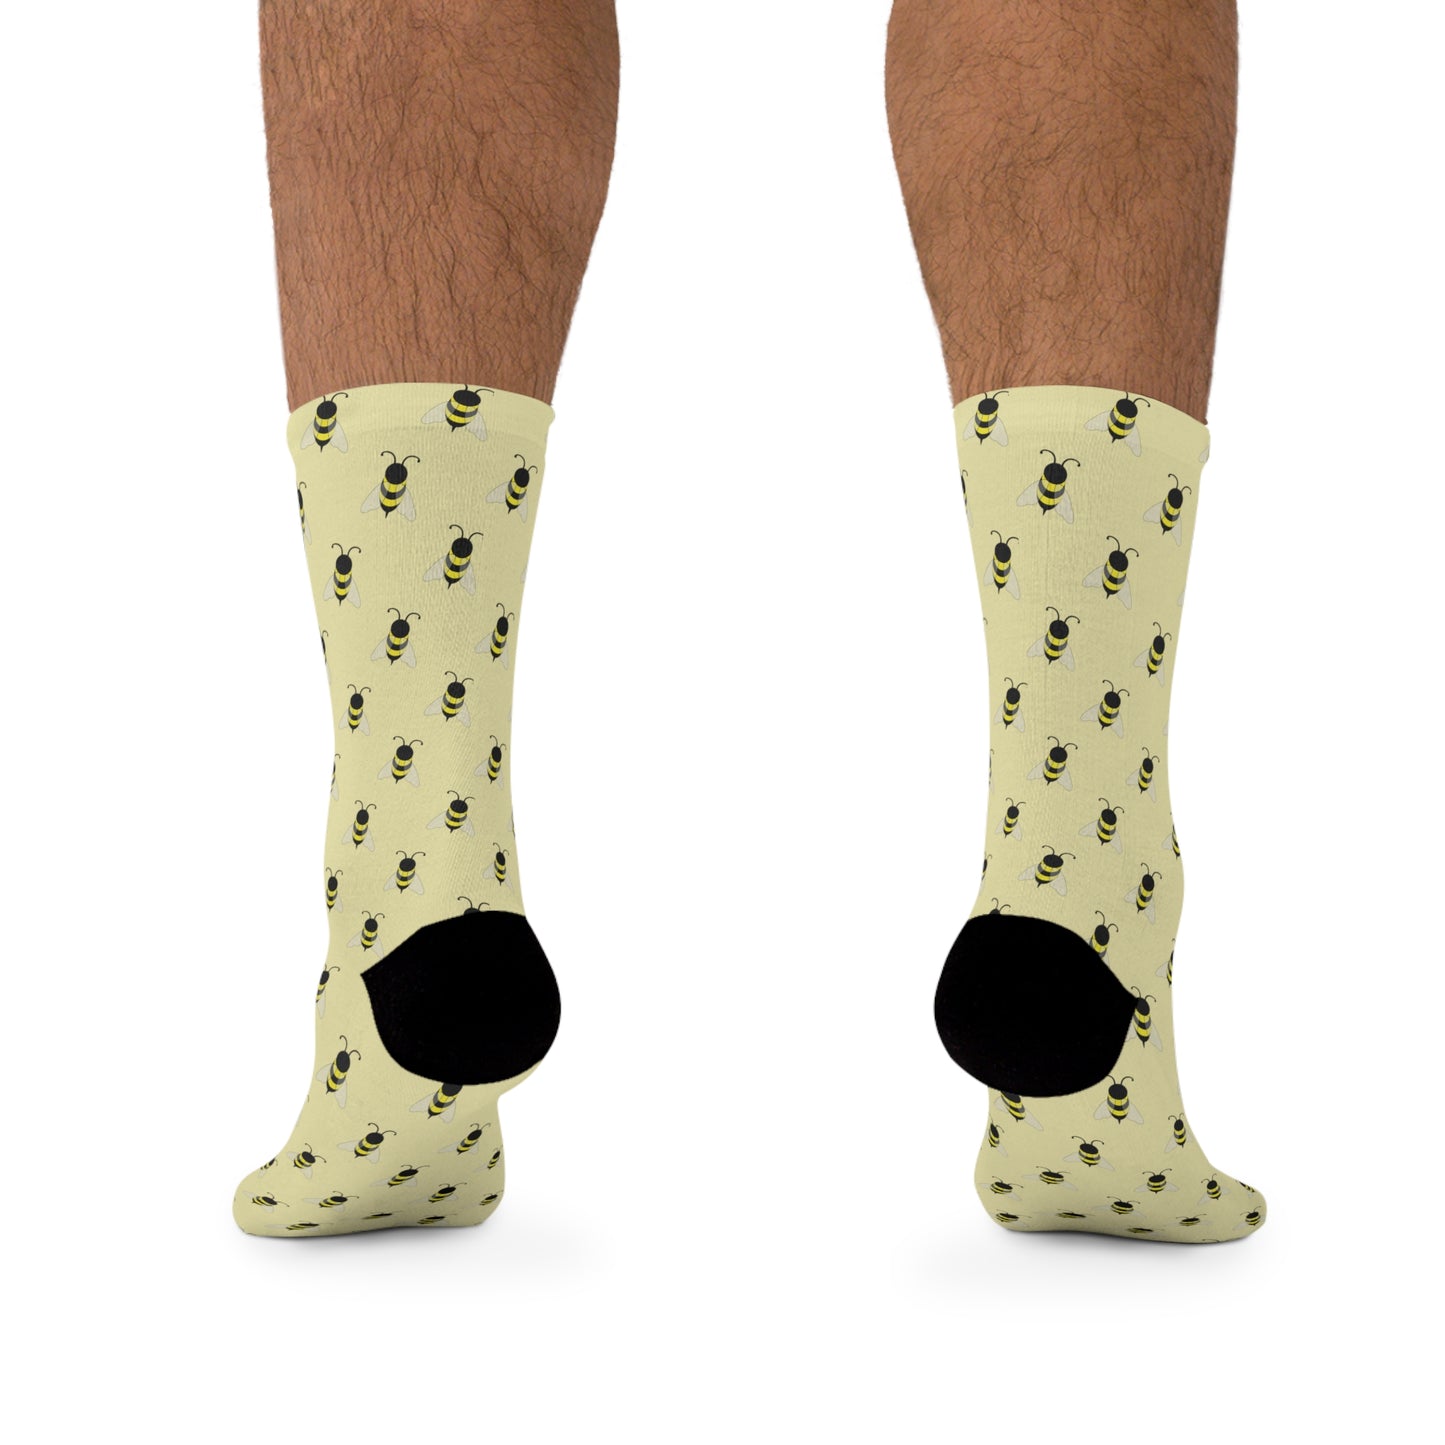 Bee Patterned Socks: The Recycled Poly Eco-Friendly and Stylish Socks for Nature Lovers